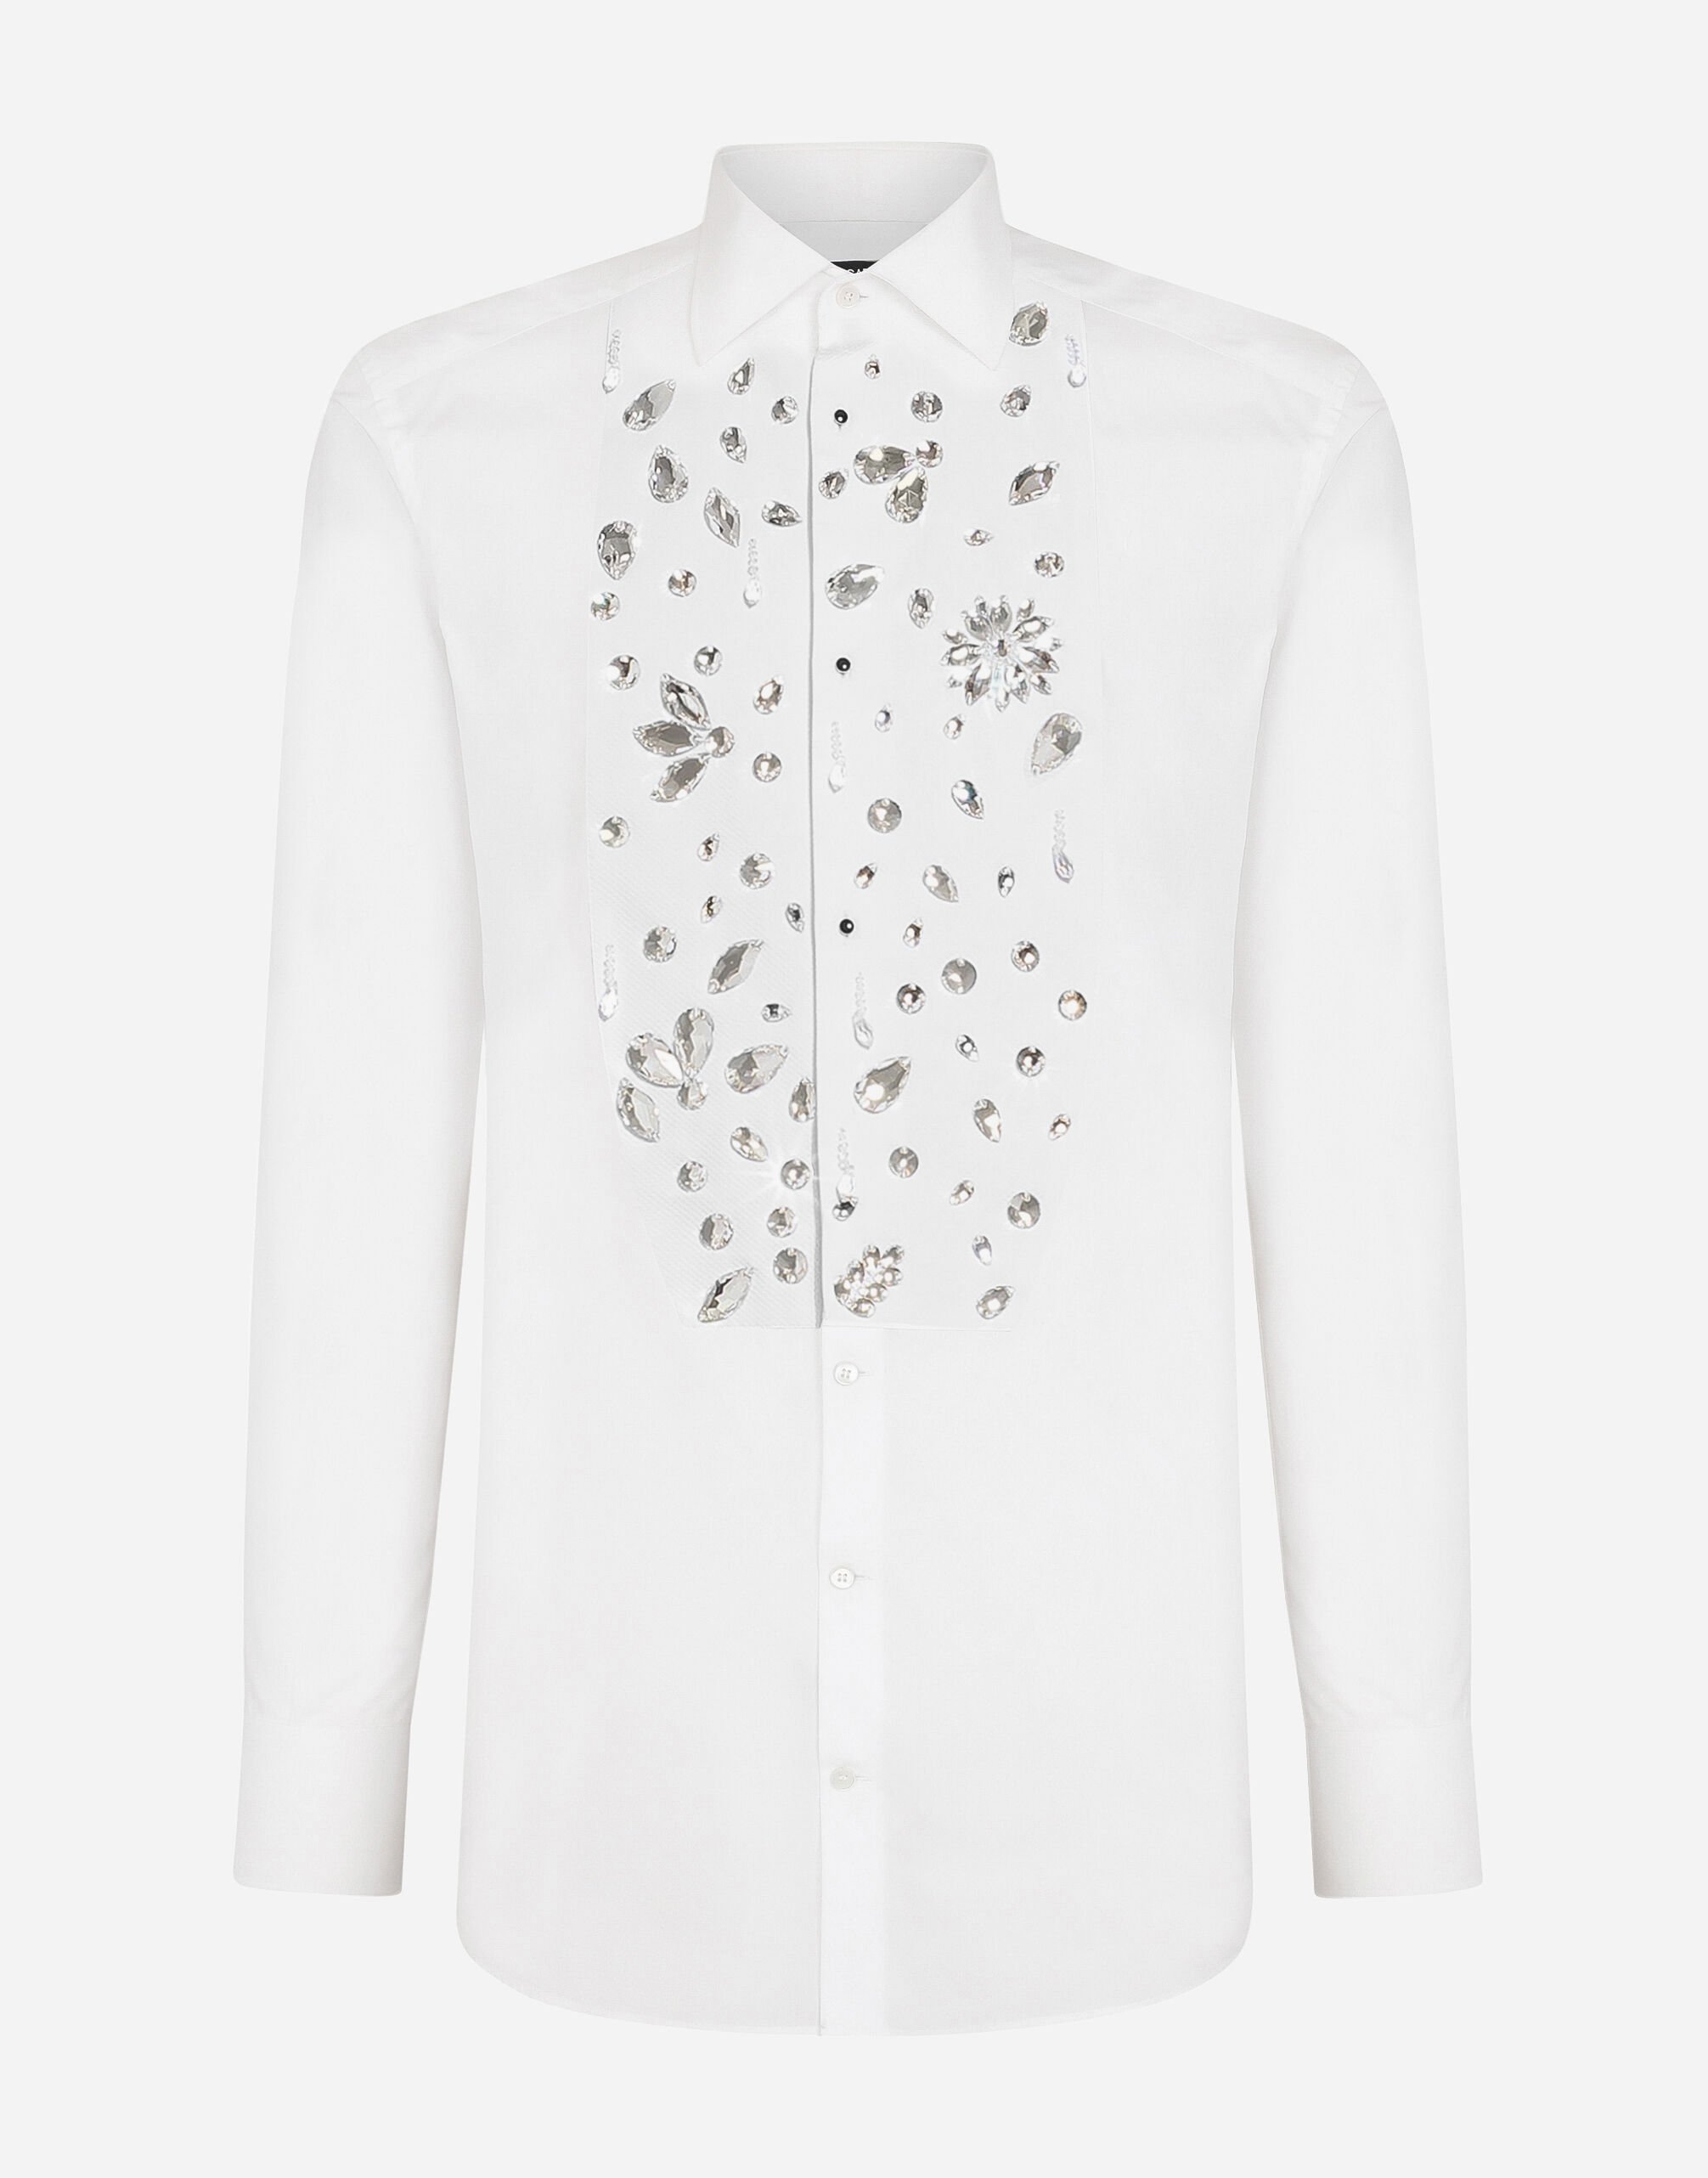 ${brand} Gold-fit tuxedo shirt with rhinestone embroidery ${colorDescription} ${masterID}